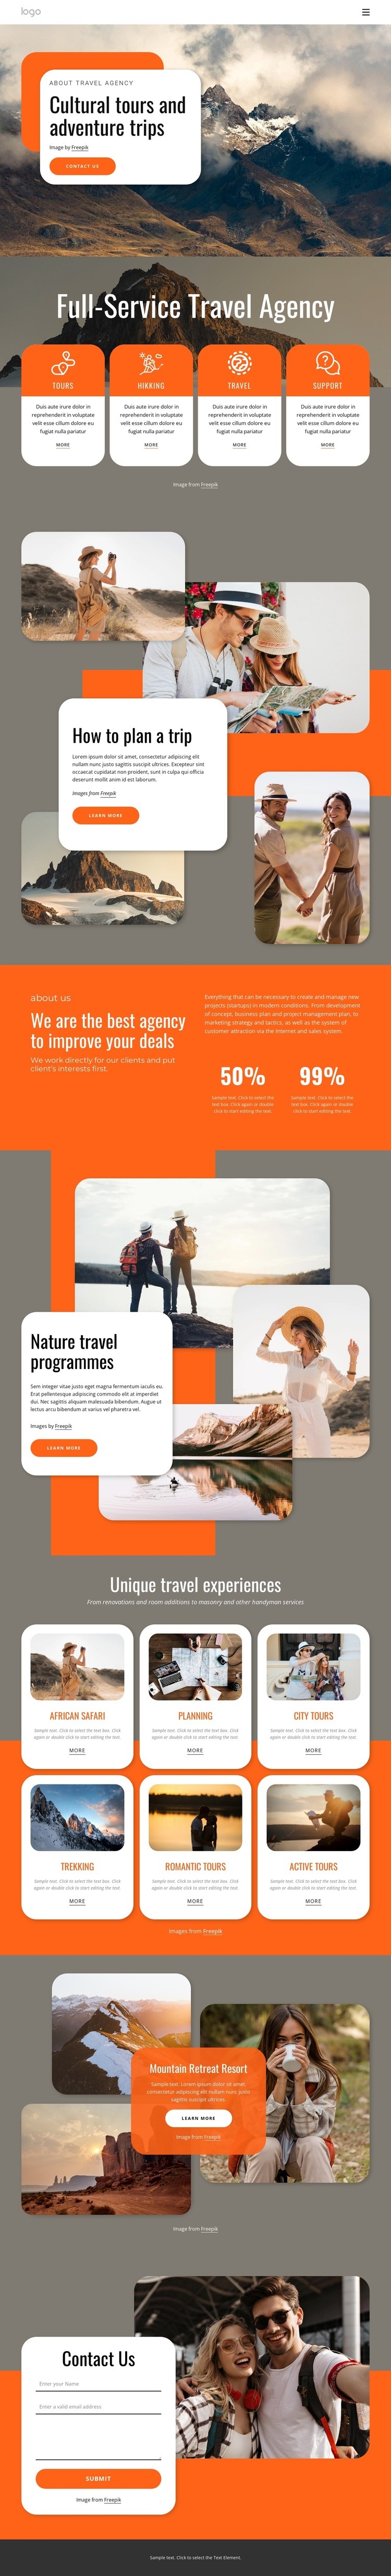 Group travel for all ages Wysiwyg Editor Html 